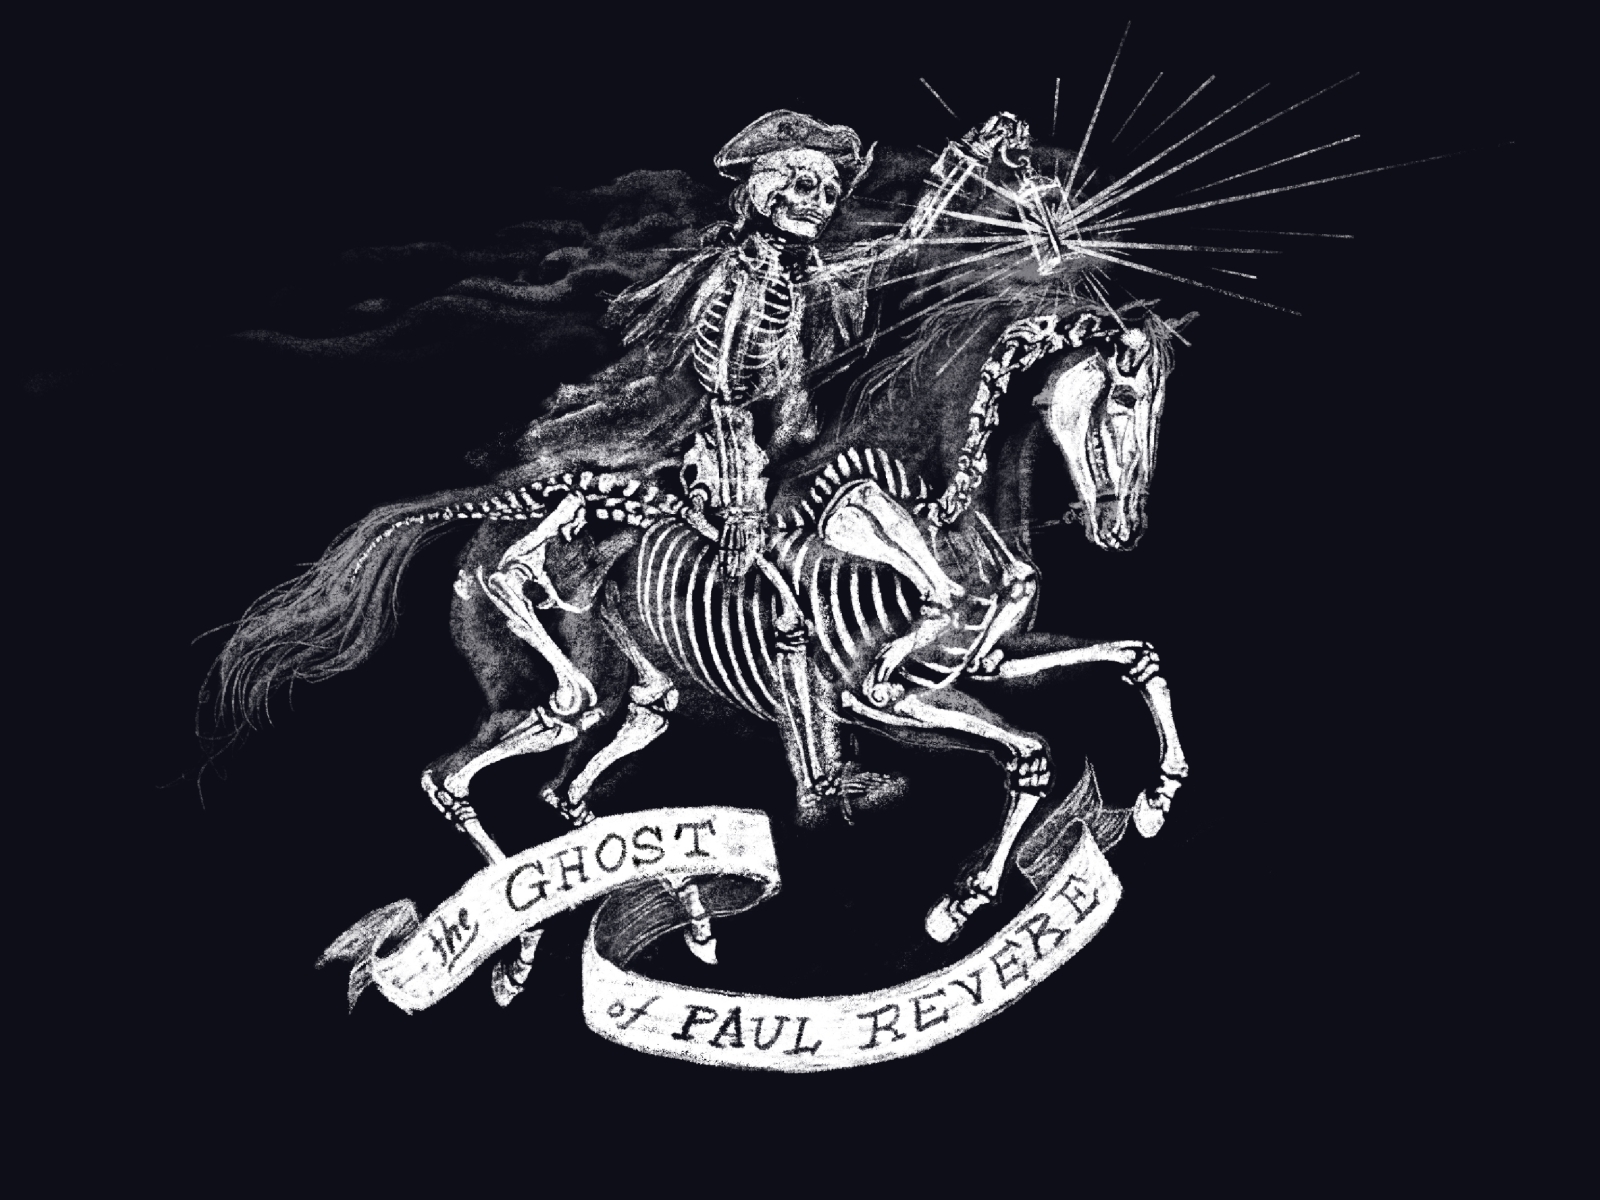 Paul Revere Rides Again by Shannon Adams on Dribbble